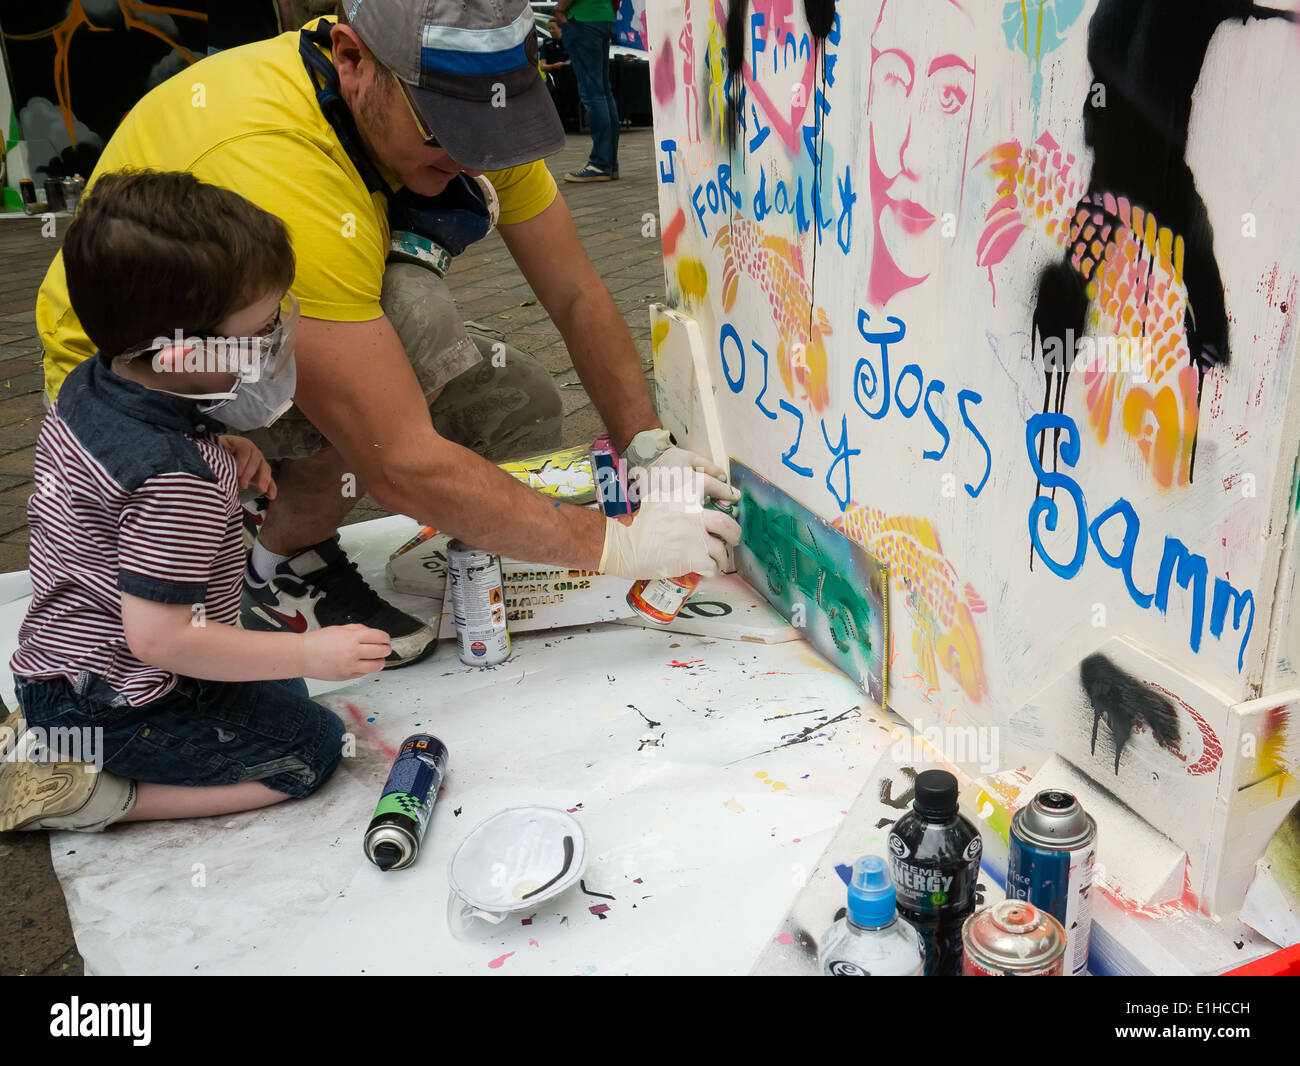 A young boy learns how to stencil using spray paint to make graffiti street art during the Portsmouth street games 2014 Stock Photo